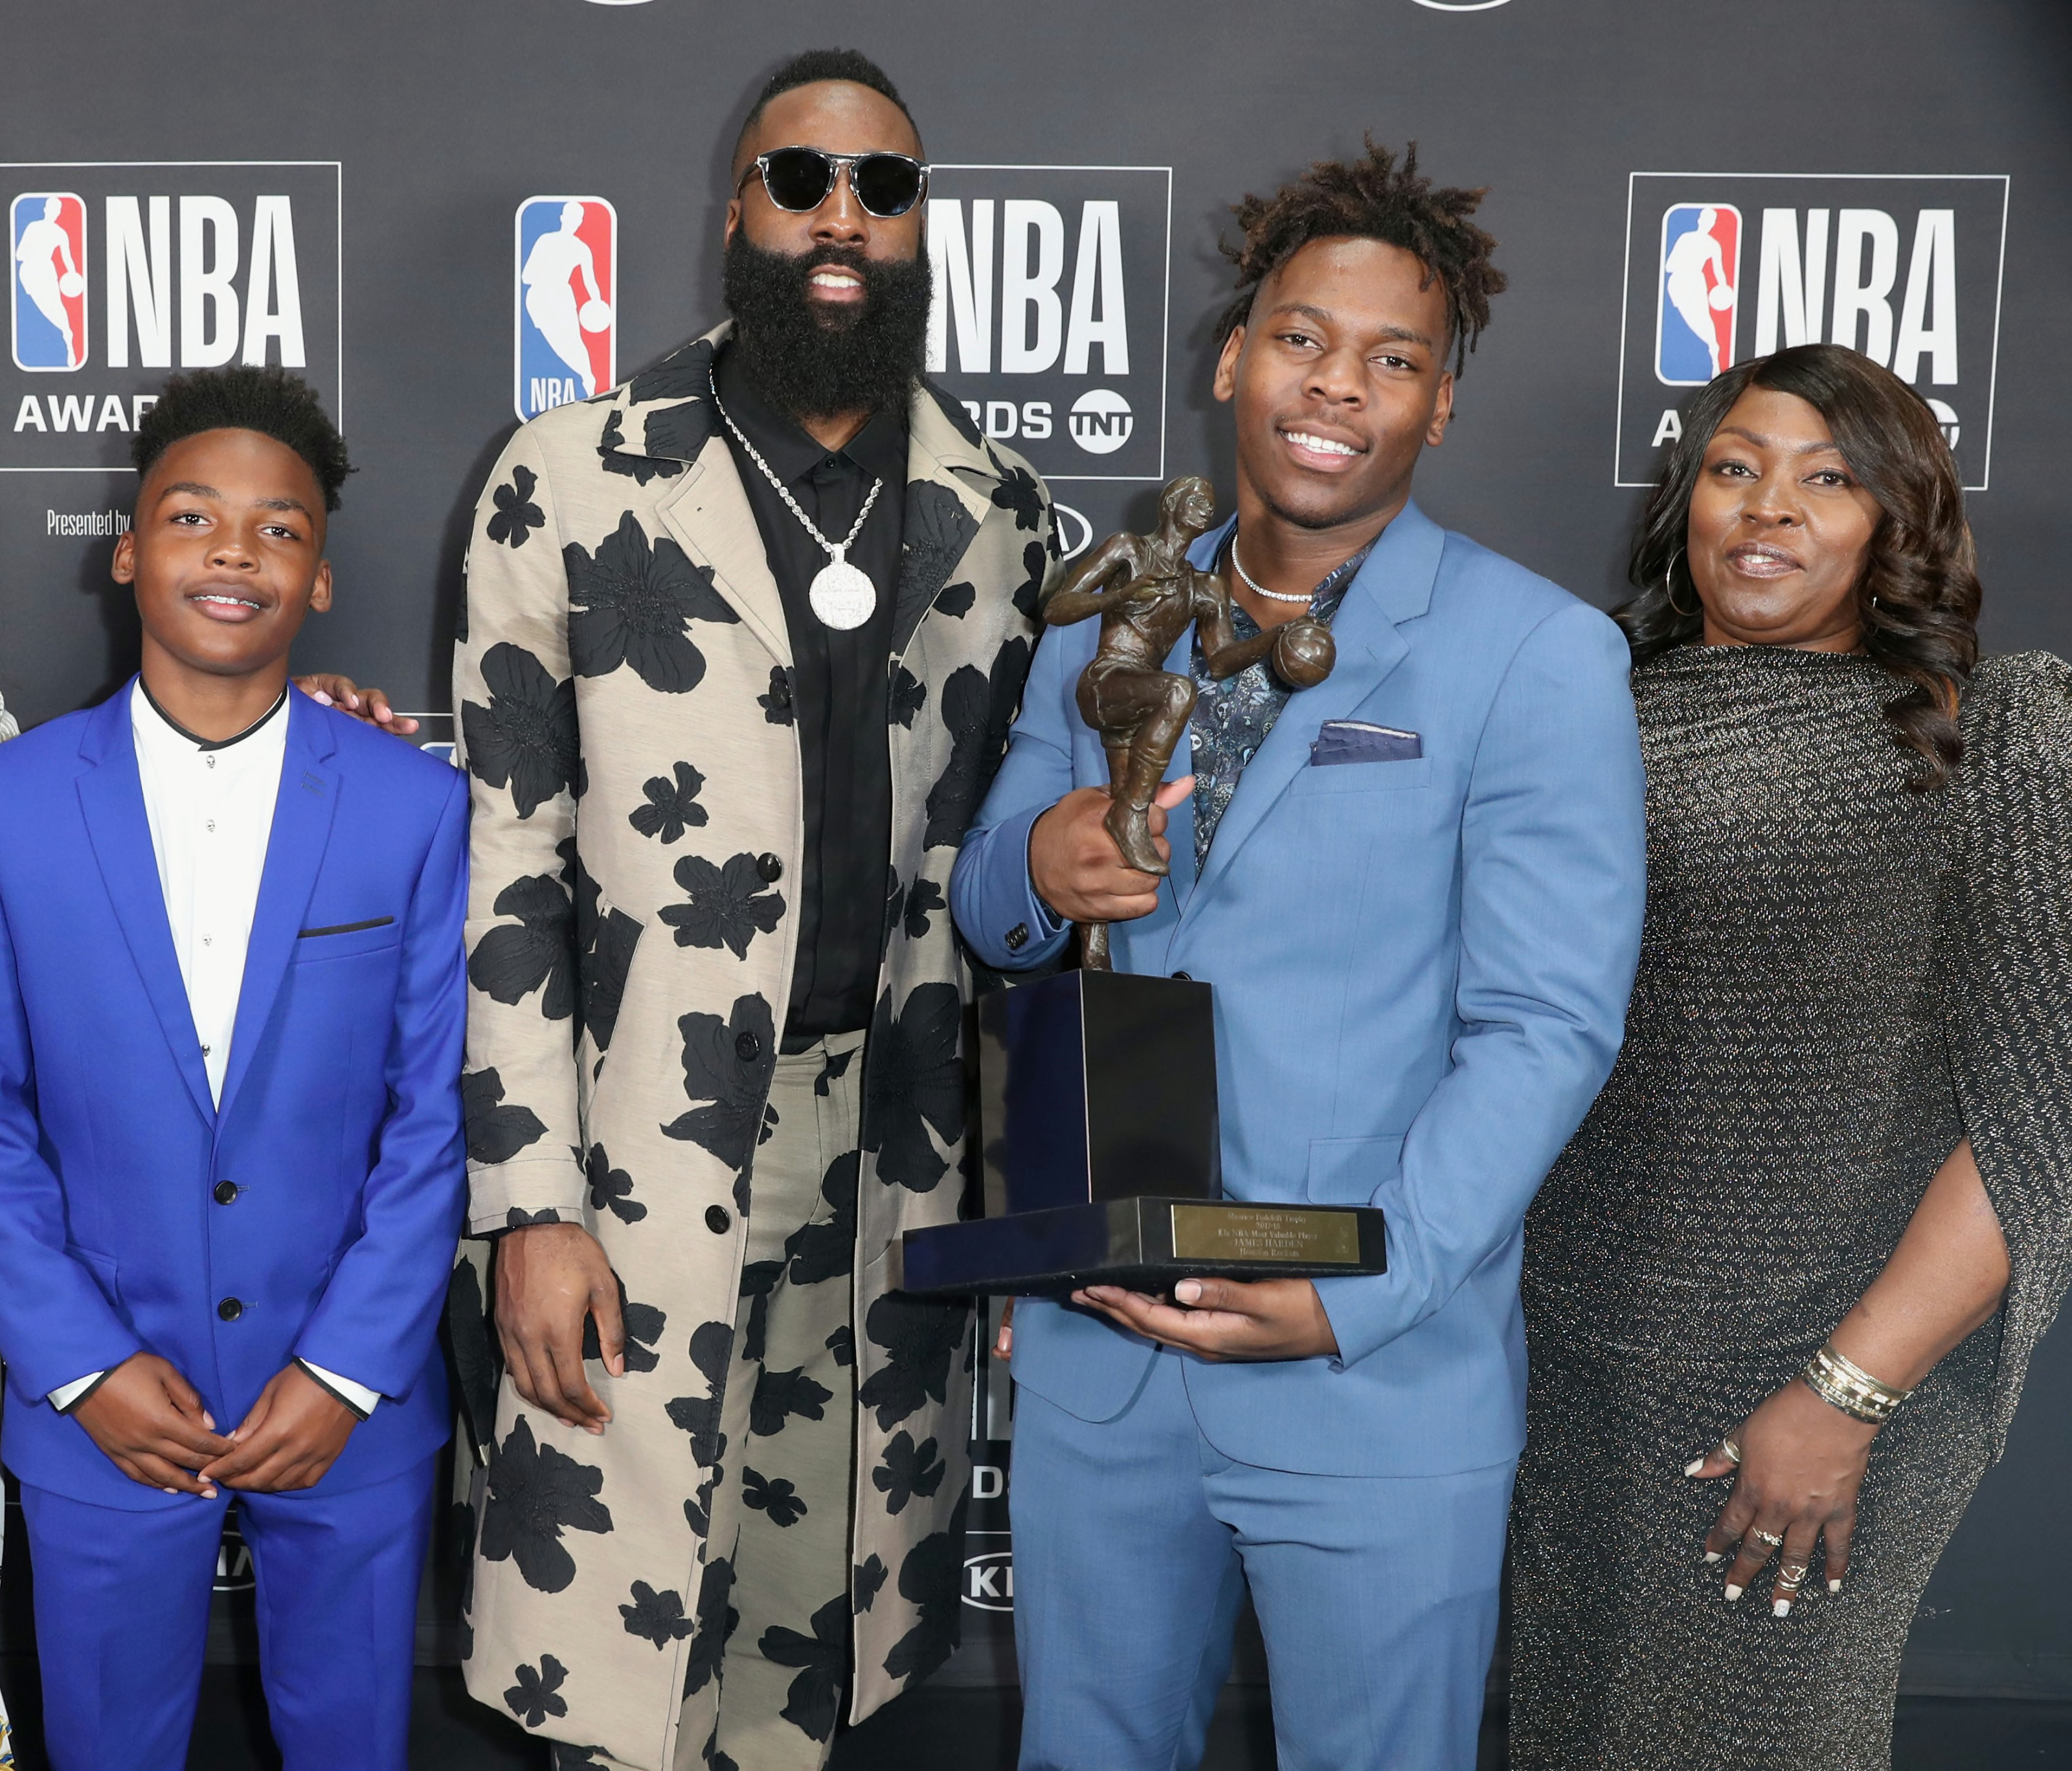 Rockets' James Harden and his mom on how sports shaped the MVP